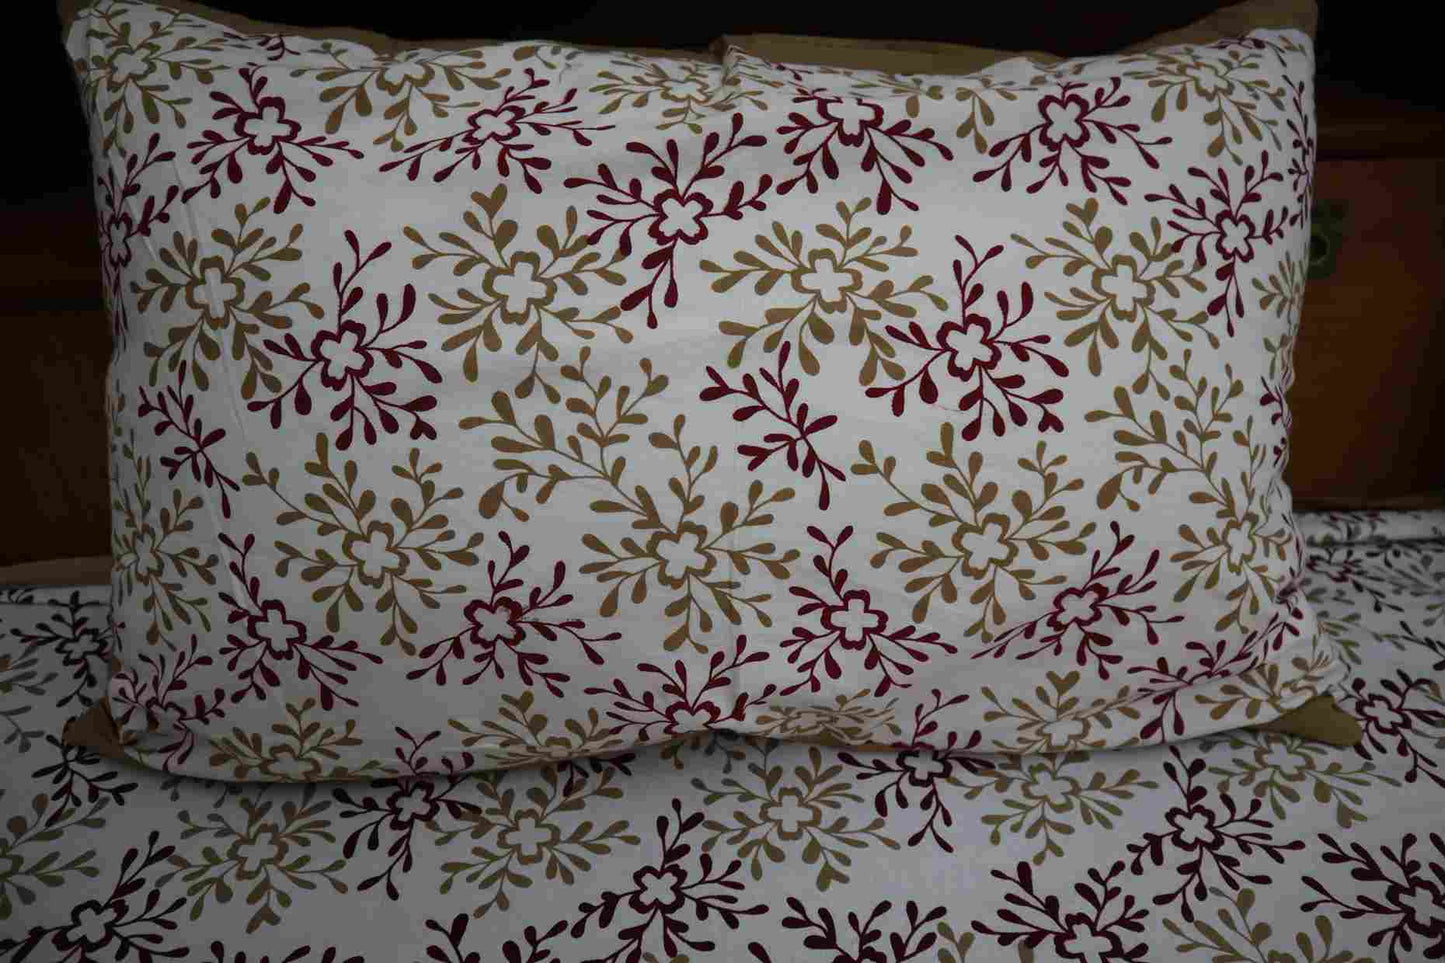 Pure Cotton White Jaipuri Bedsheets for Double Bed with Pillow Covers, 90" x 108" King Size, 180 TC, Breathable and Skin Friendly